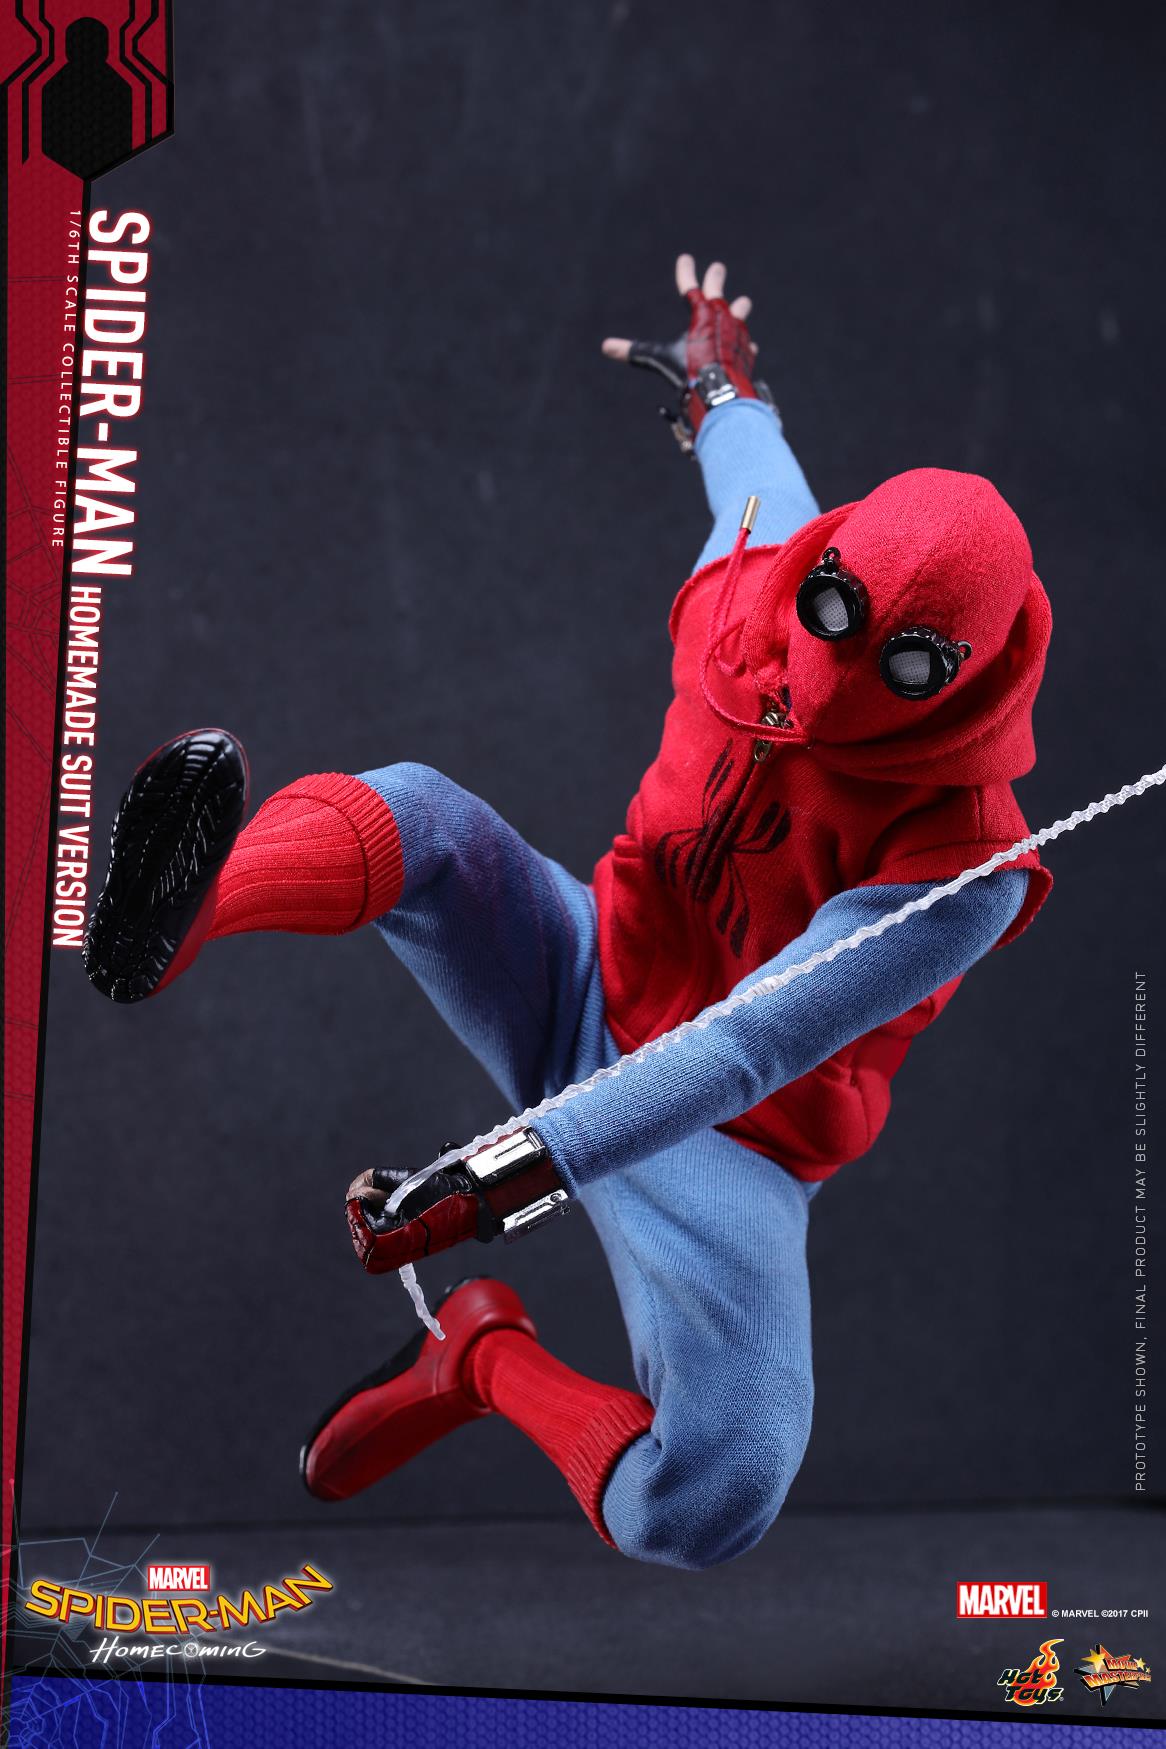 Hot Toys Reveals Their SPIDER-MAN: HOMECOMING Action Figure of Spider-Man  in His Homemade Suit — GeekTyrant